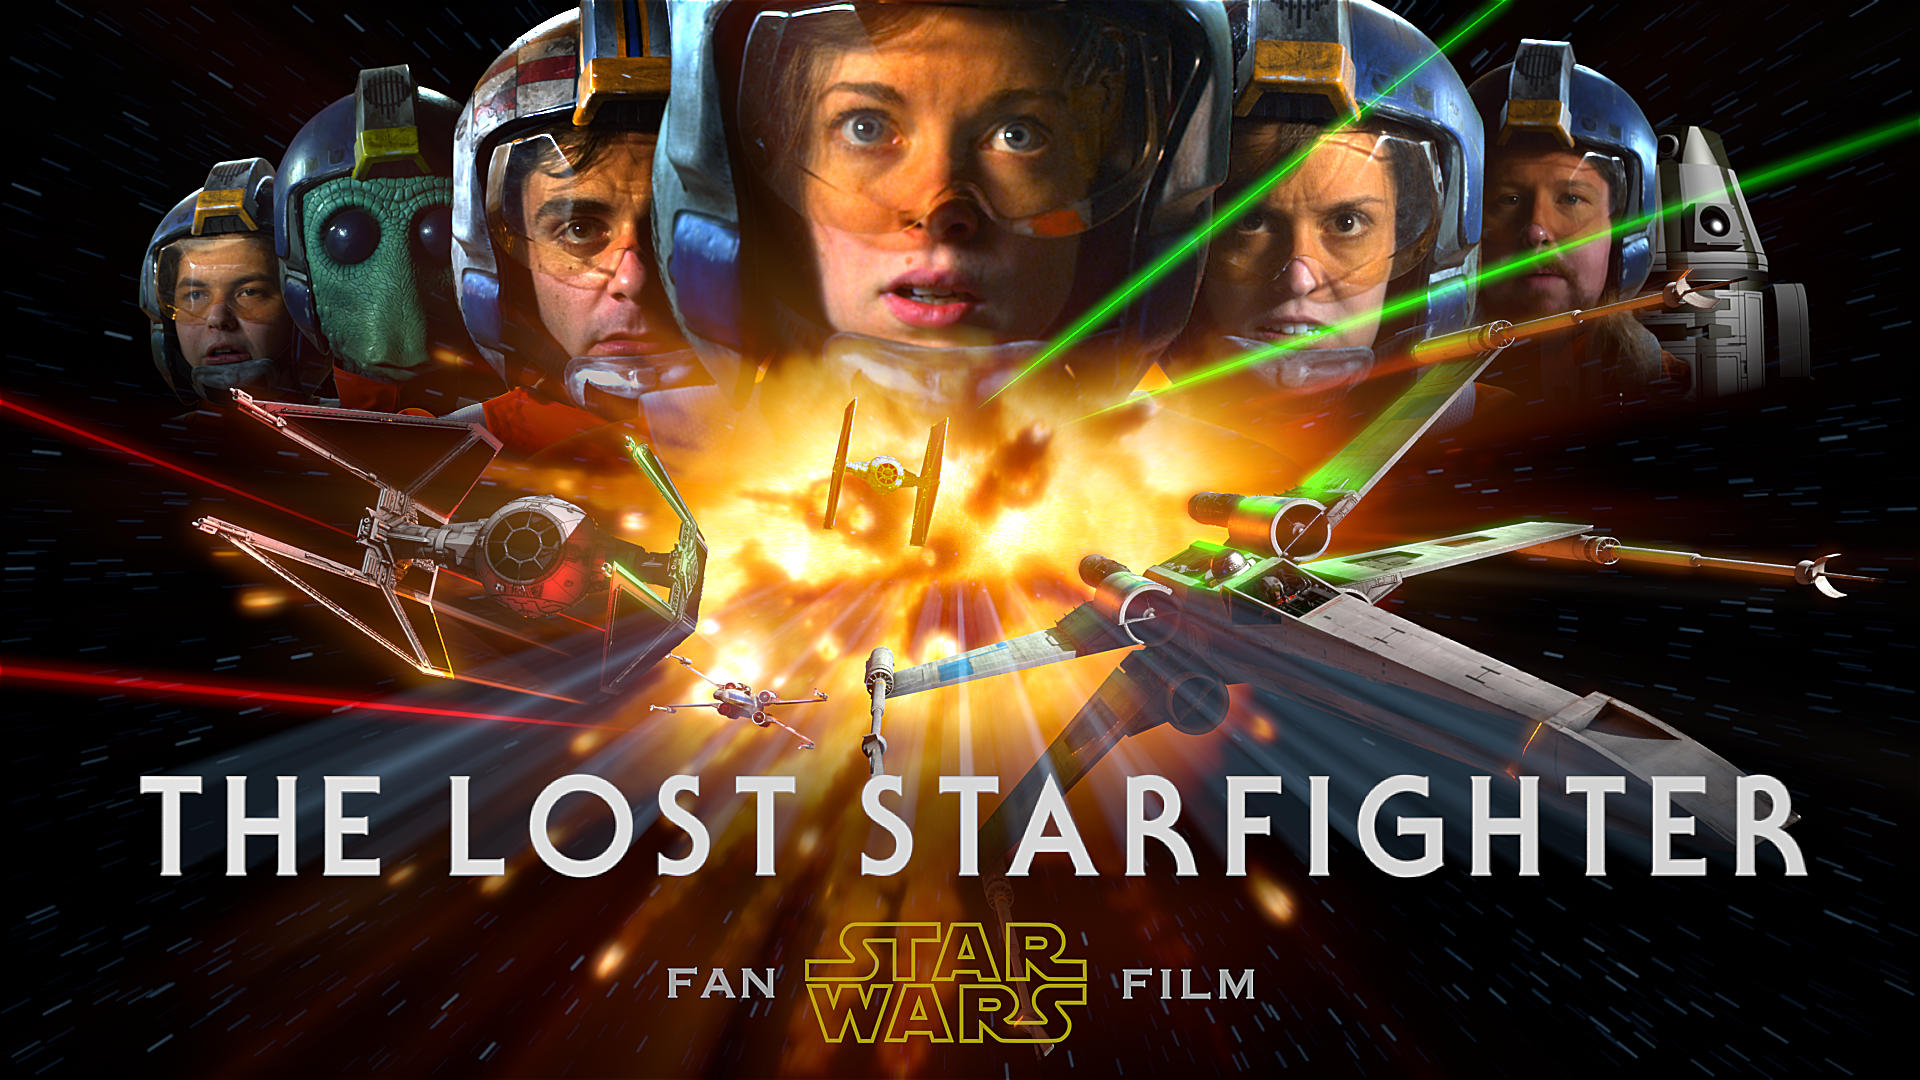 The Lost Starfigghter POSTER_v02a.jpg